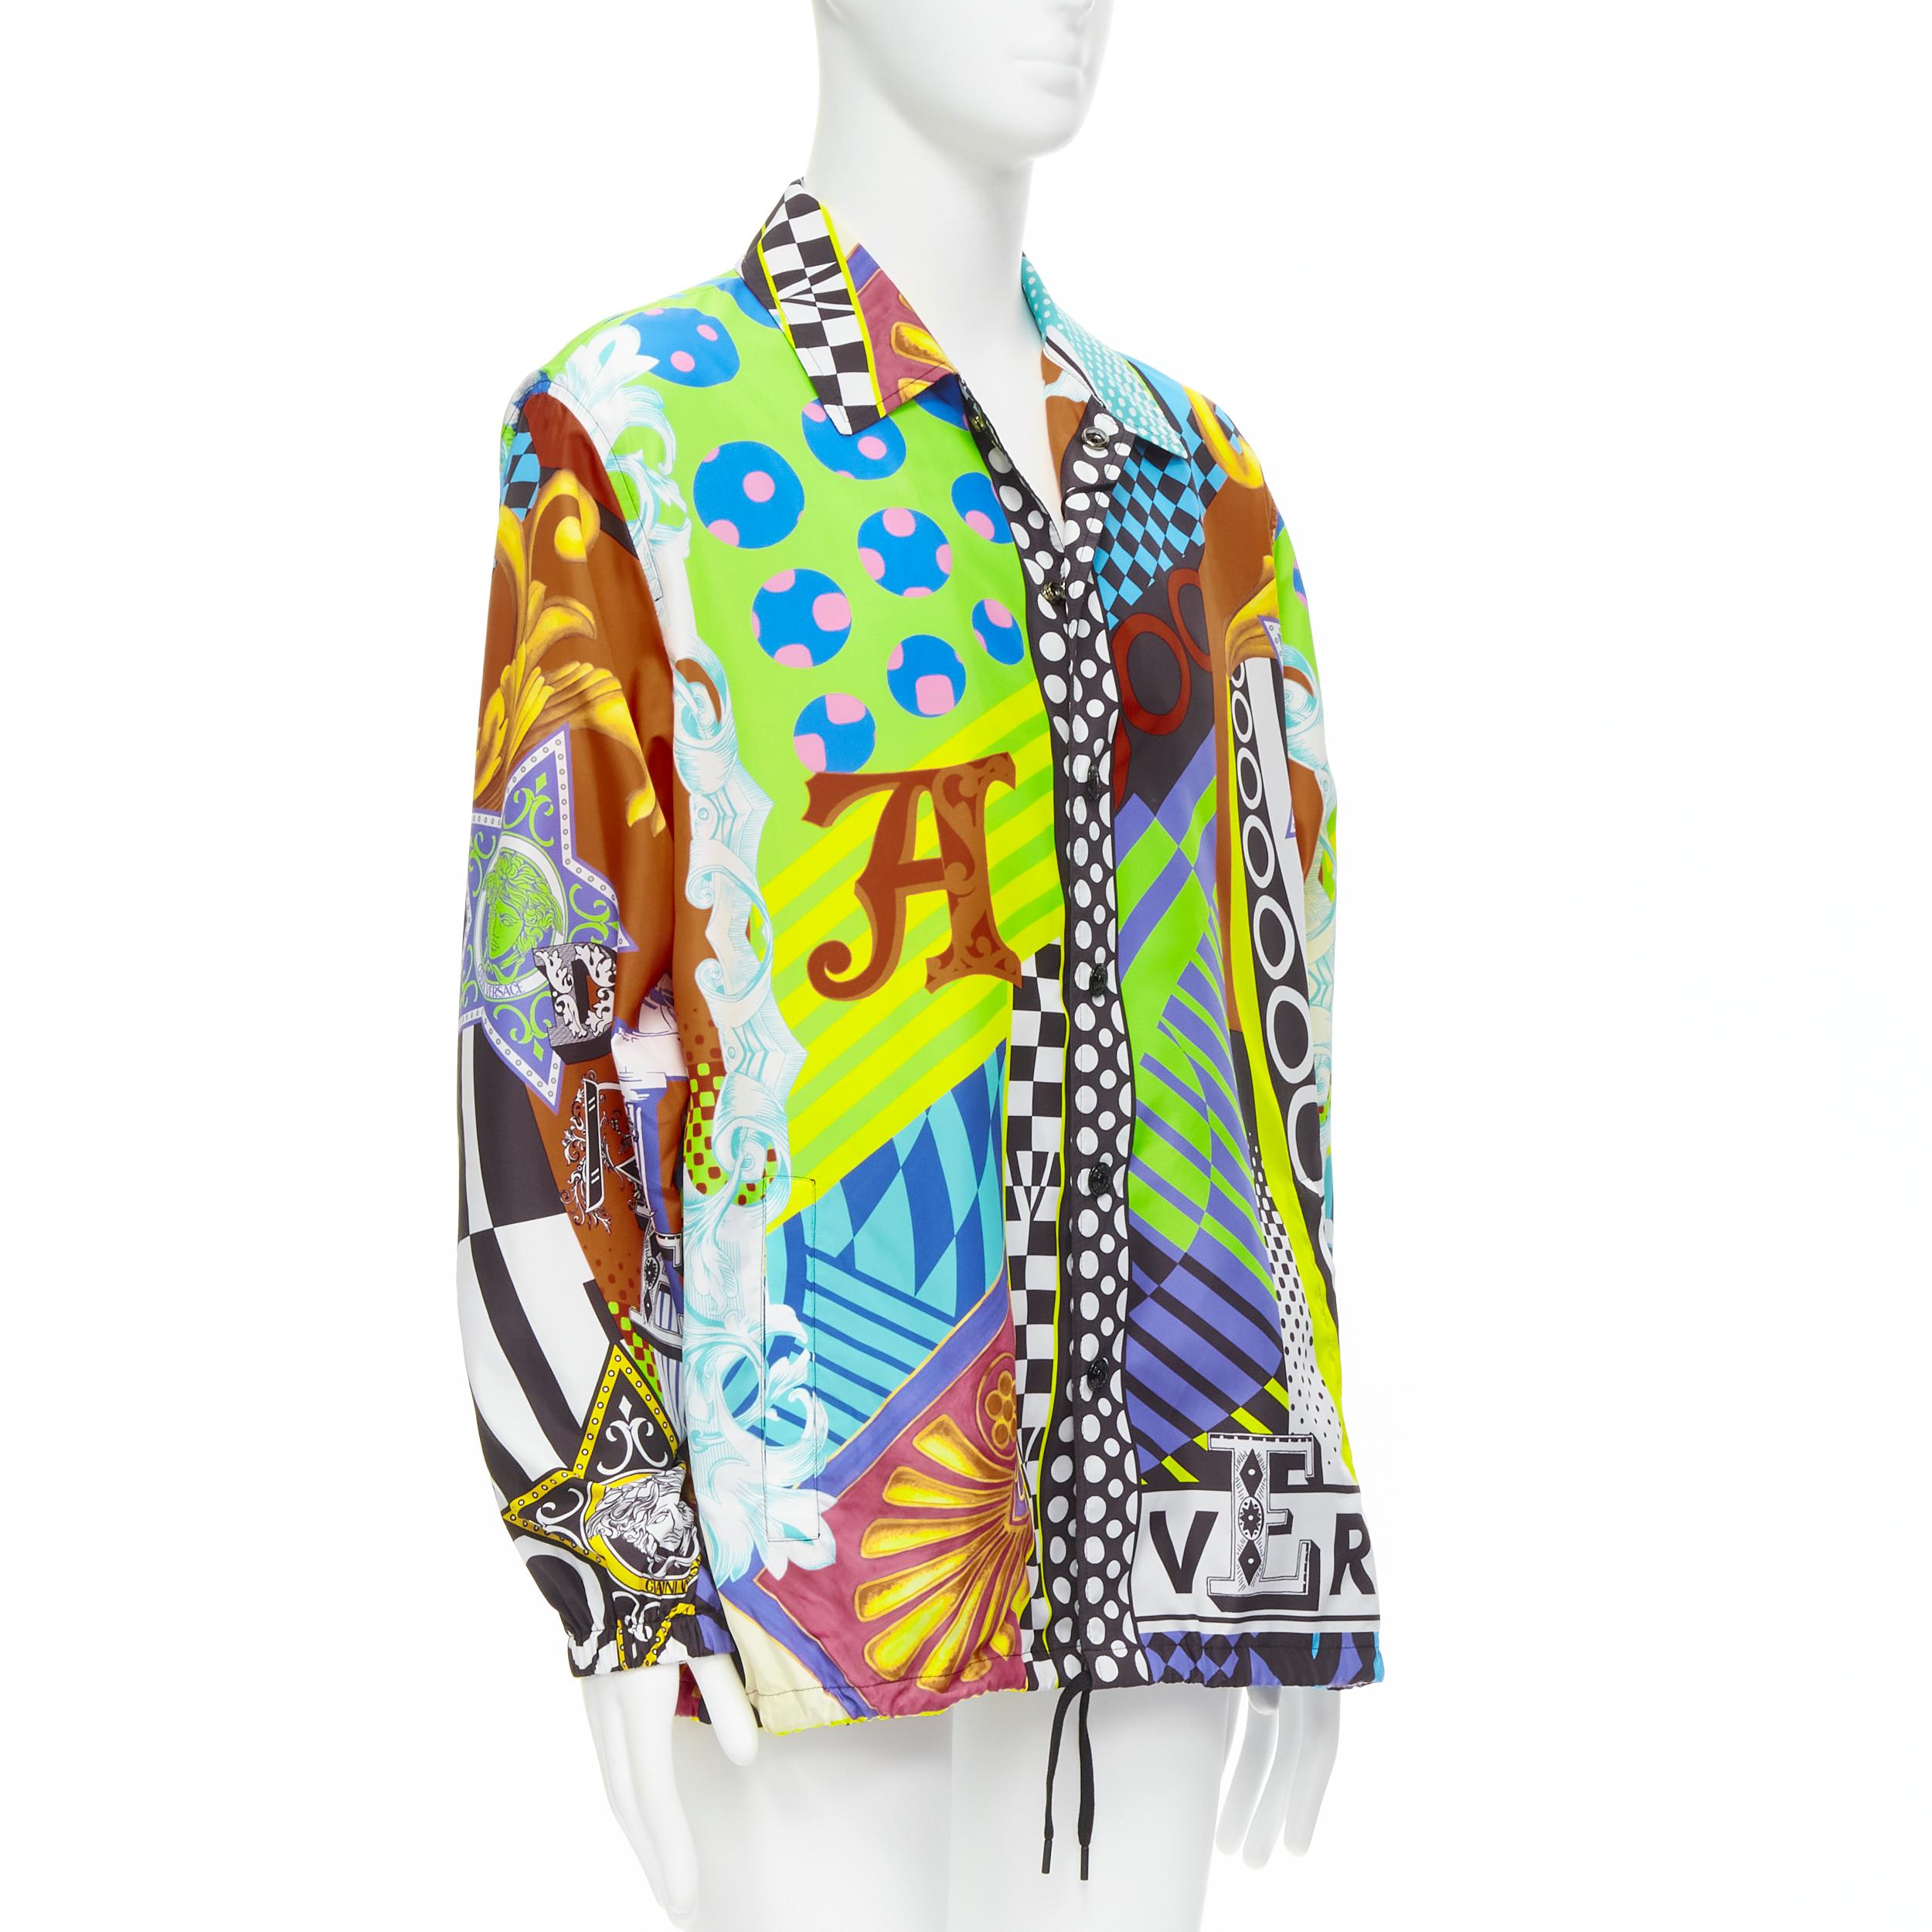 new VERSACE 2020 Runway Pop Temple nylon windbreaker over shirt jacket IT48 M
Reference: TGAS/C00119
Brand: Versace
Designer: Donatella Versace
Collection: Pop Temple Runway
Material: Nylon
Color: Multicolor
Pattern: Abstract
Closure: Button
Extra